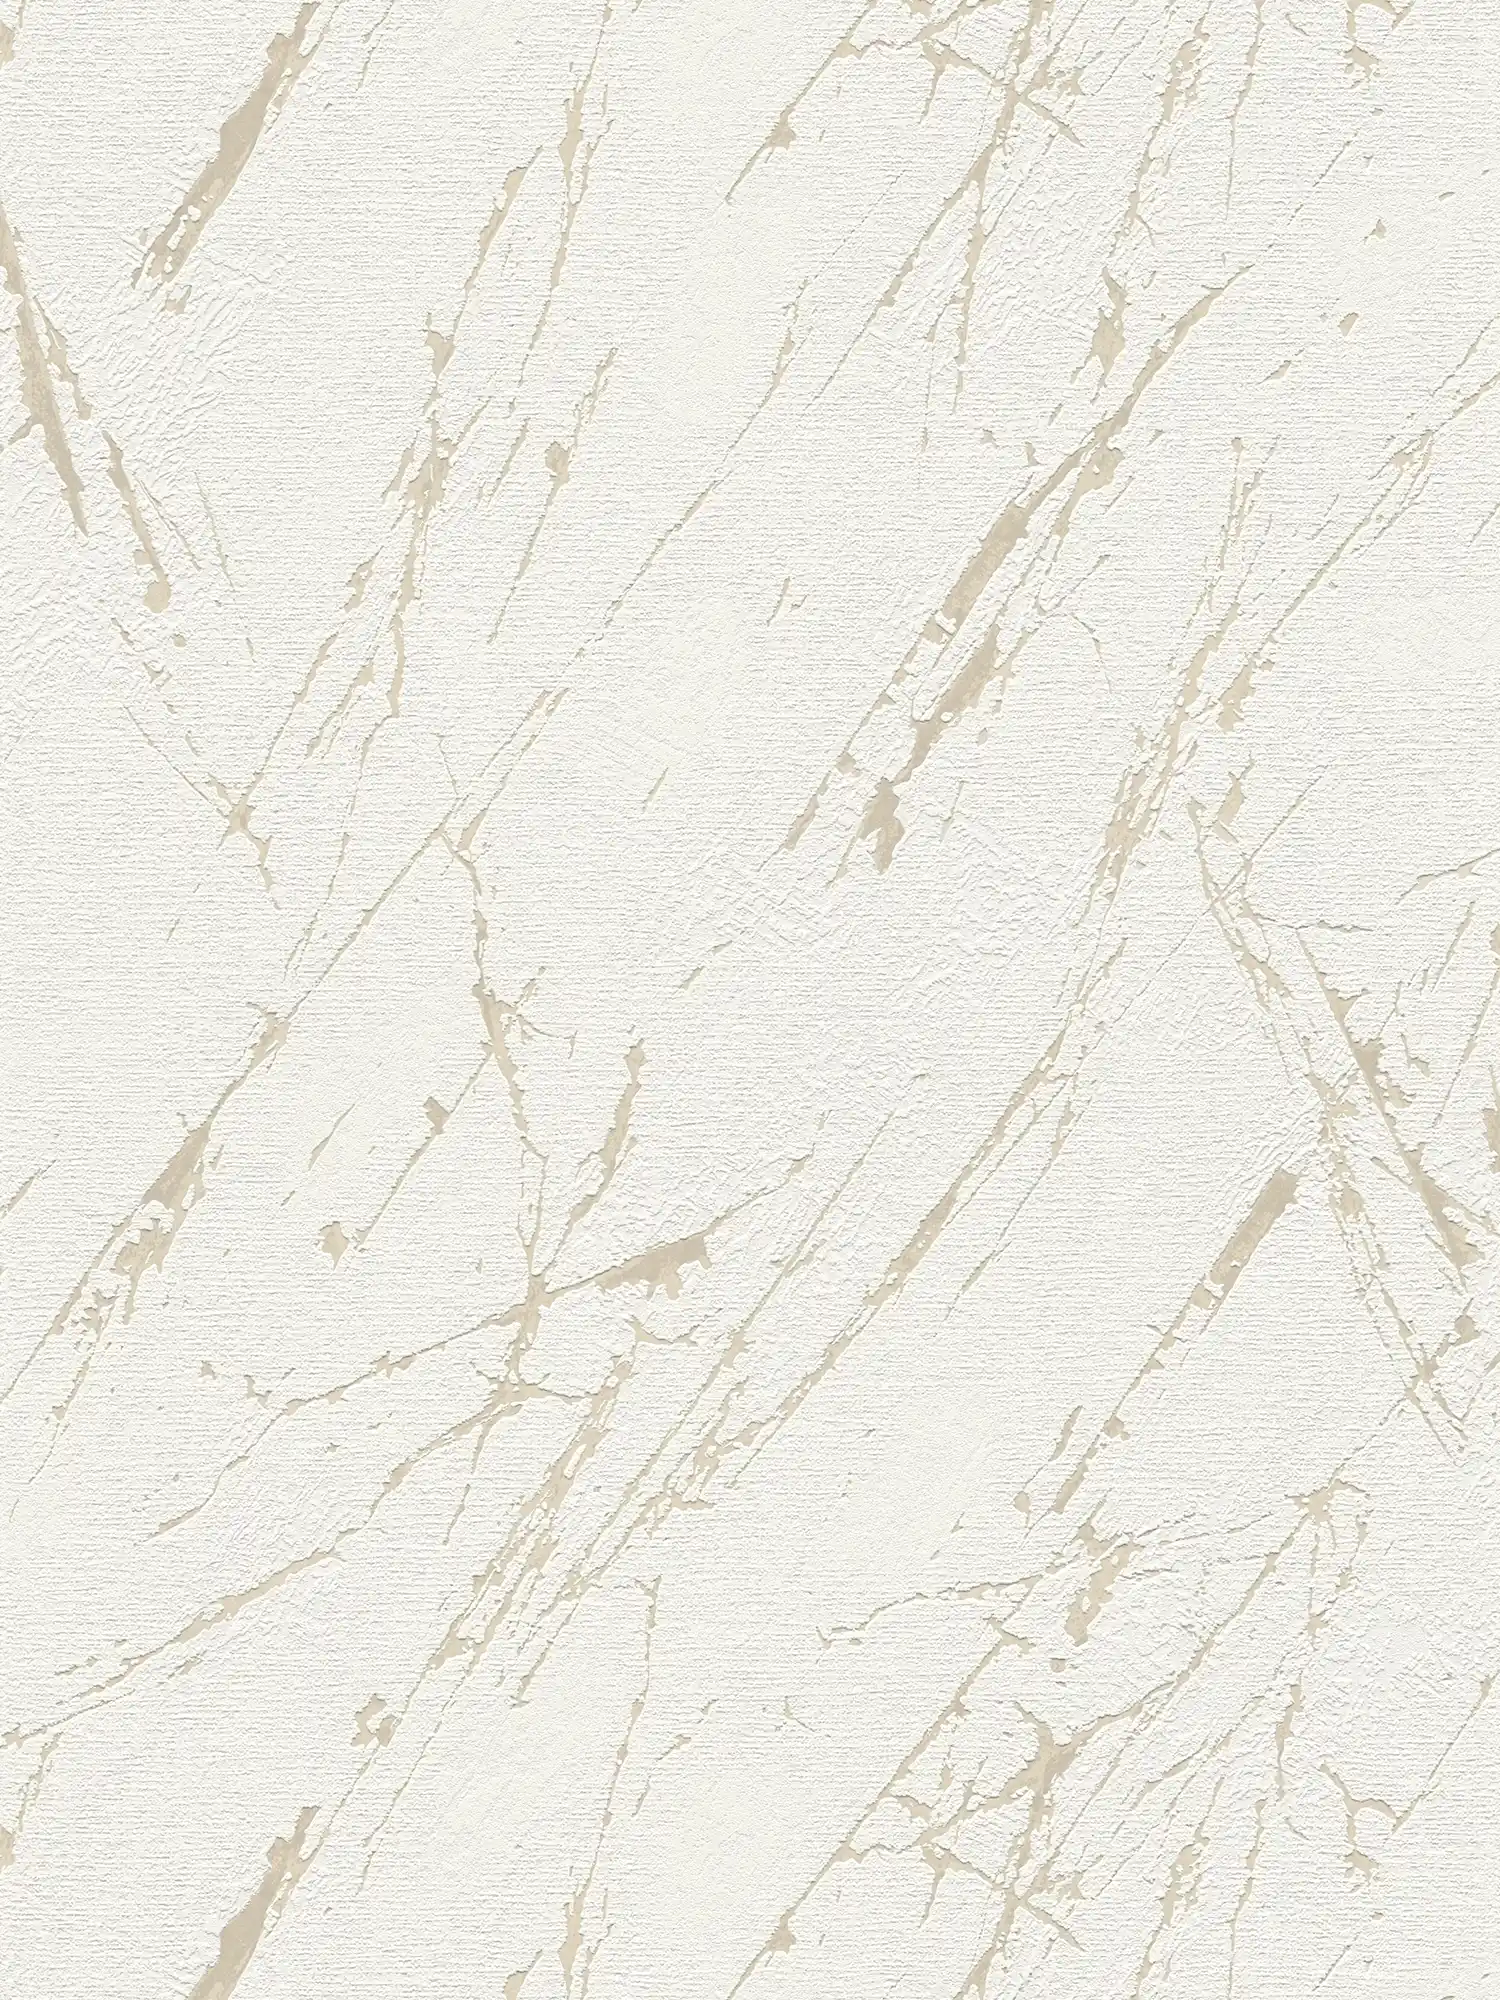 Wallpaper with plaster look pattern shimmering gold - white, champagne, metallic
